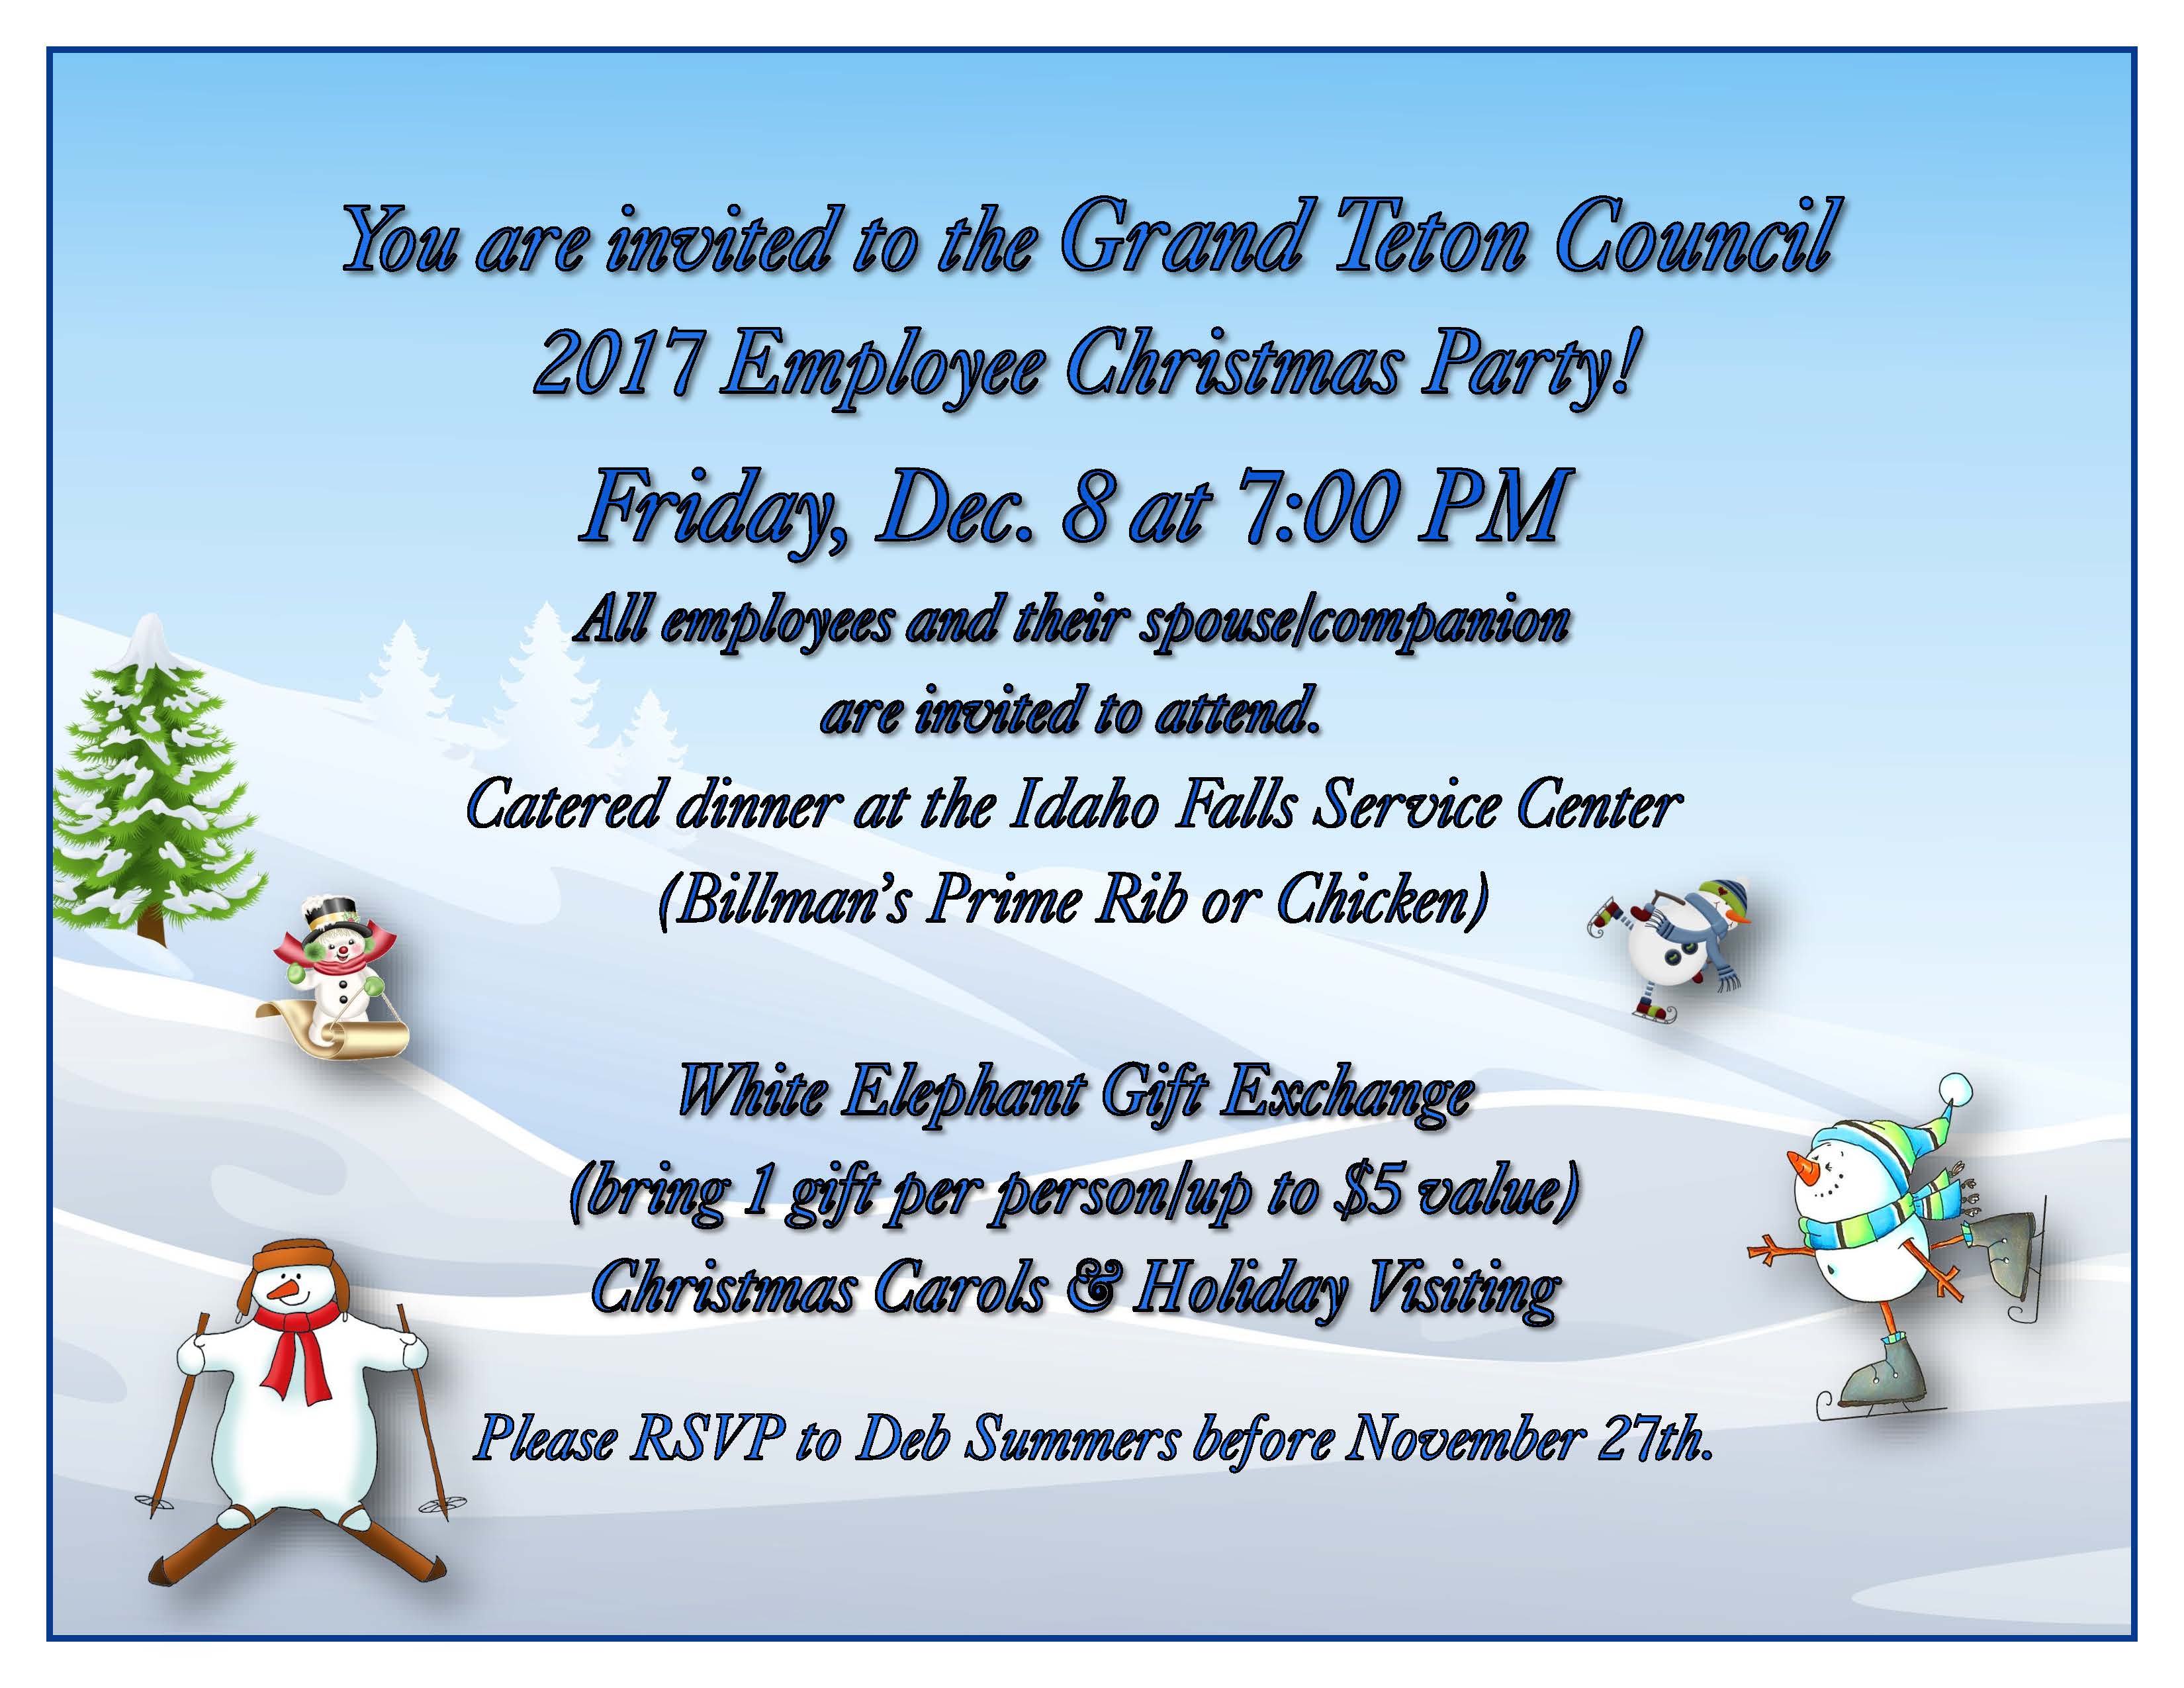 2017 Council Staff Christmas Party